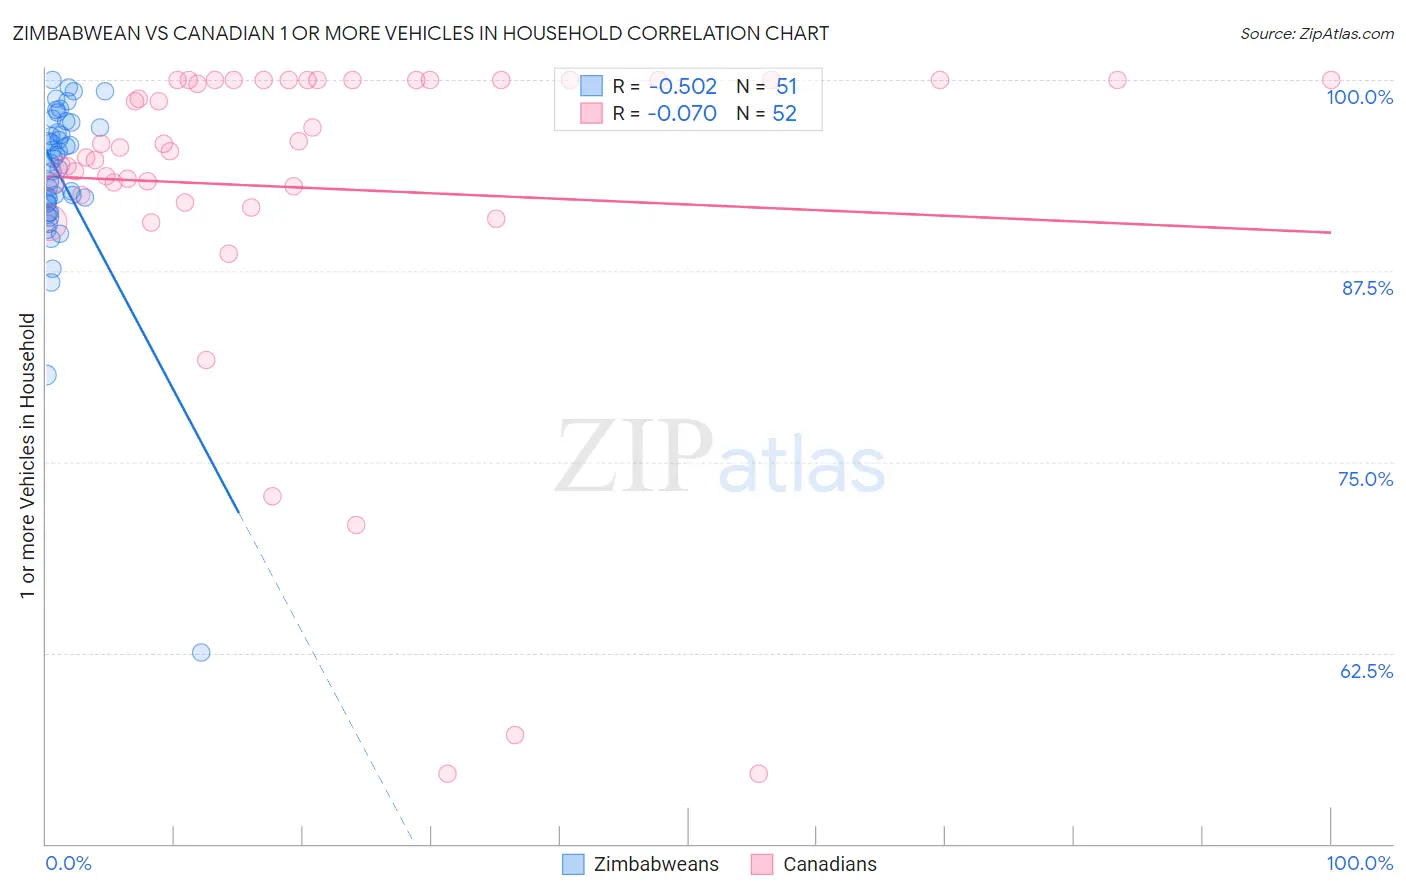 Zimbabwean vs Canadian 1 or more Vehicles in Household